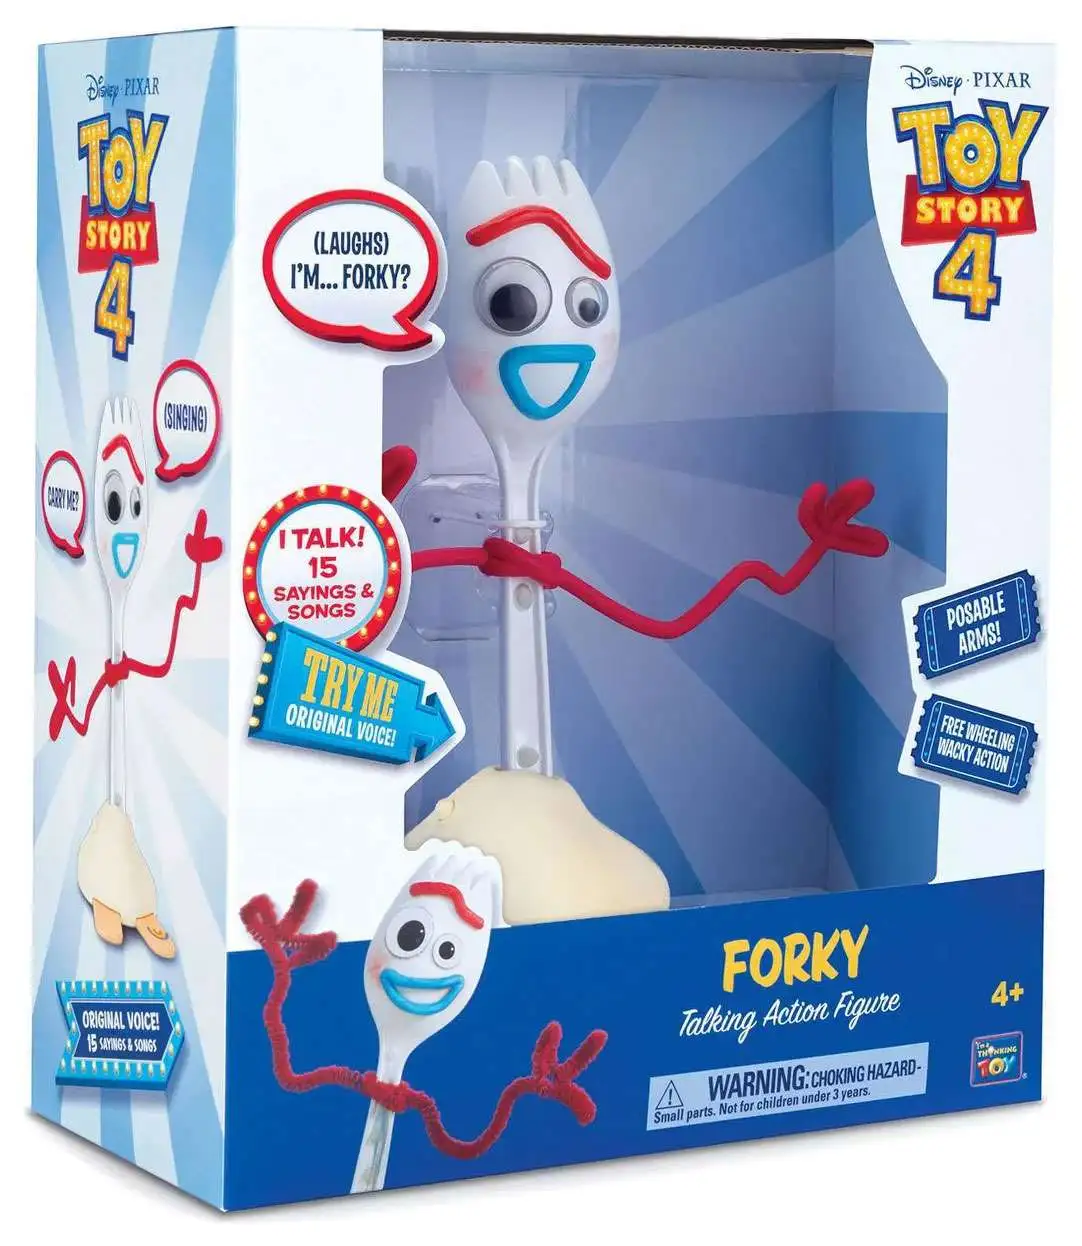 Meet Forky! 'Toy Story 4' teaser trailer introduces disruptive new toy